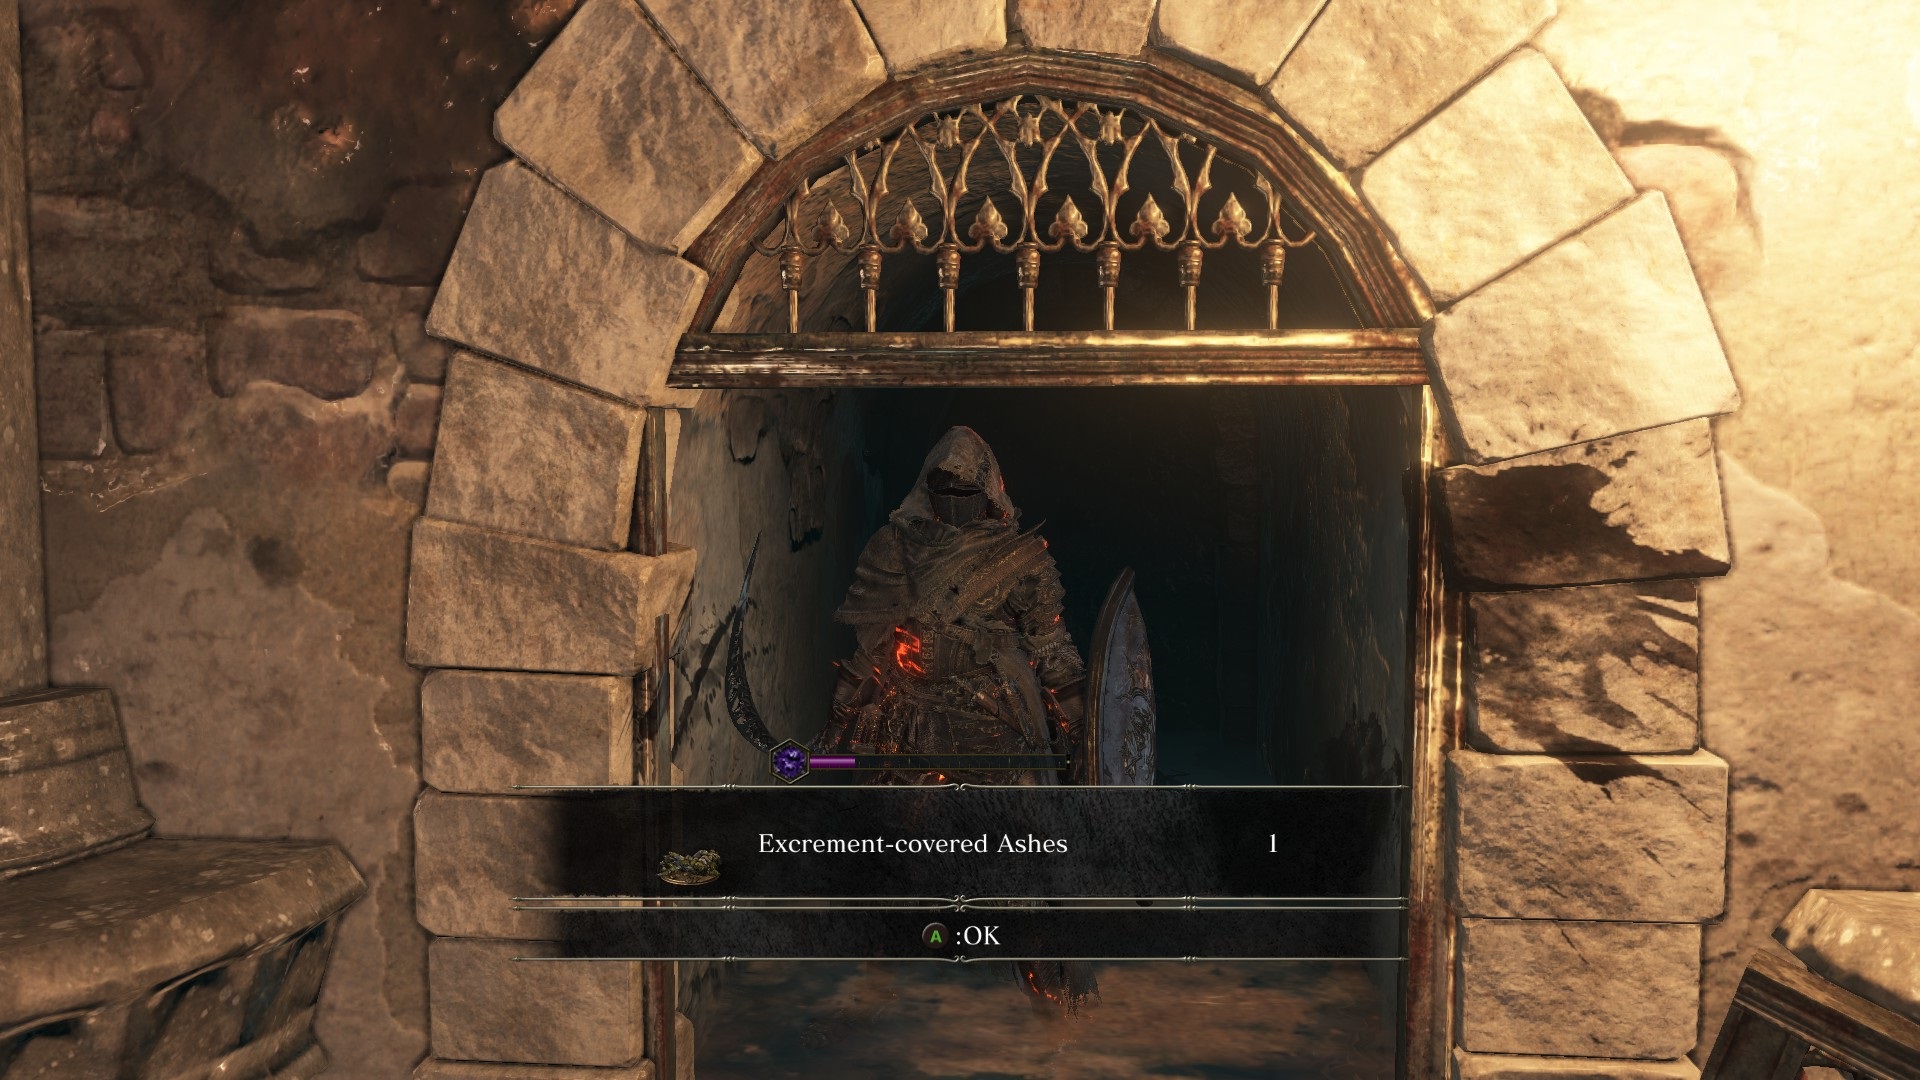 Dark Souls 3 Irithyll Excrement Ashes